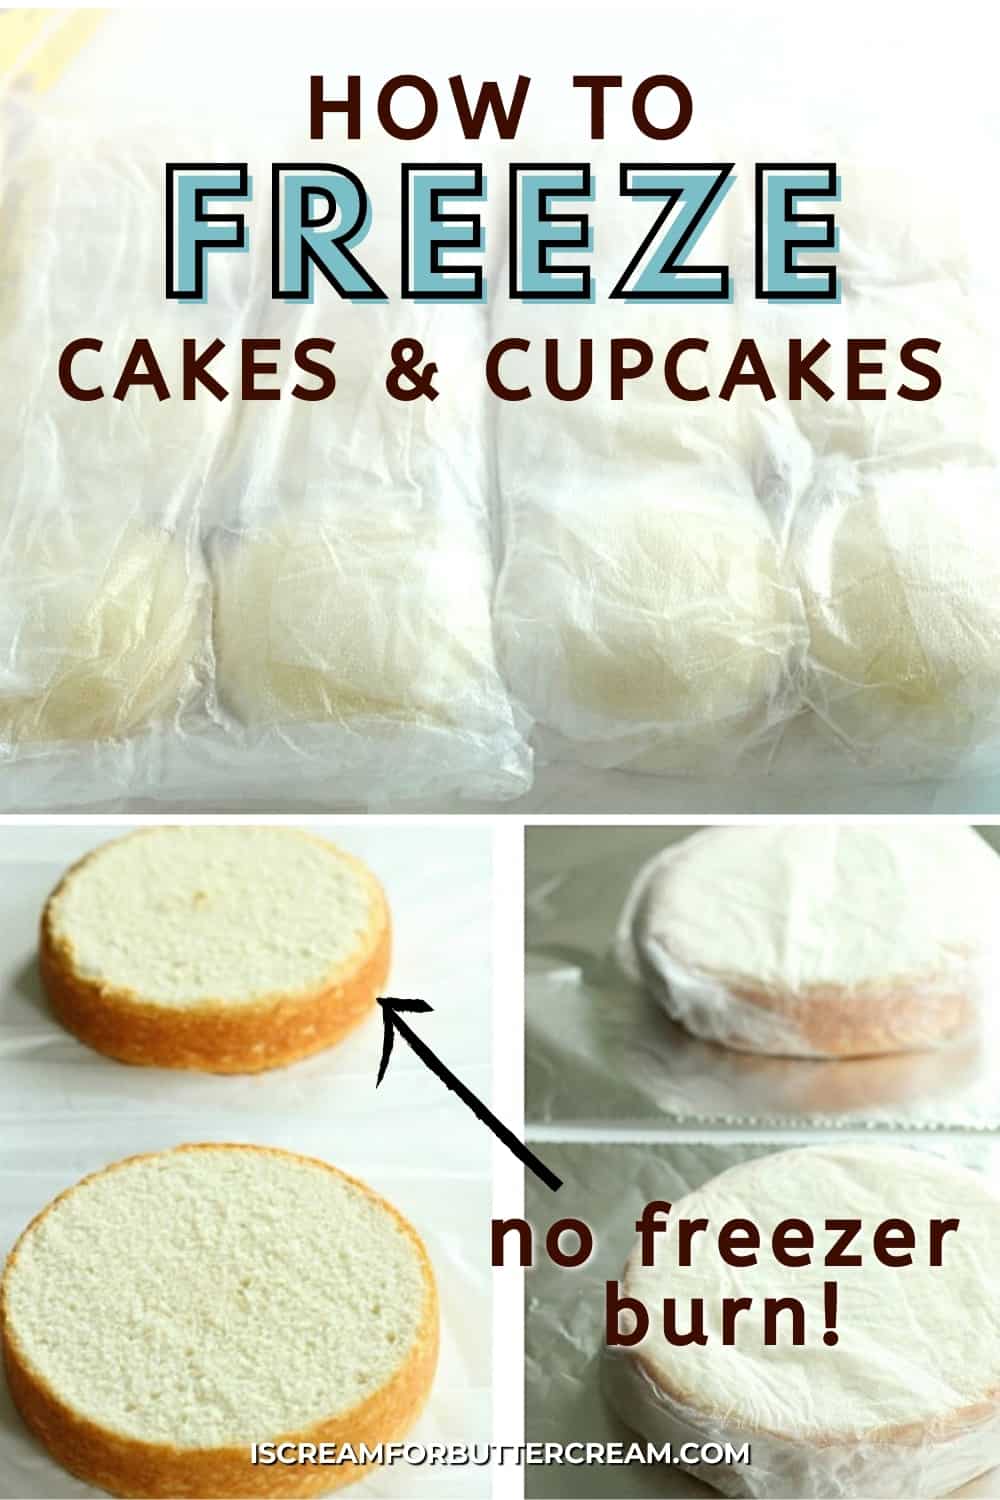 Can You Freeze Cake Icing: Preserving Icing for Future Cake Decorations